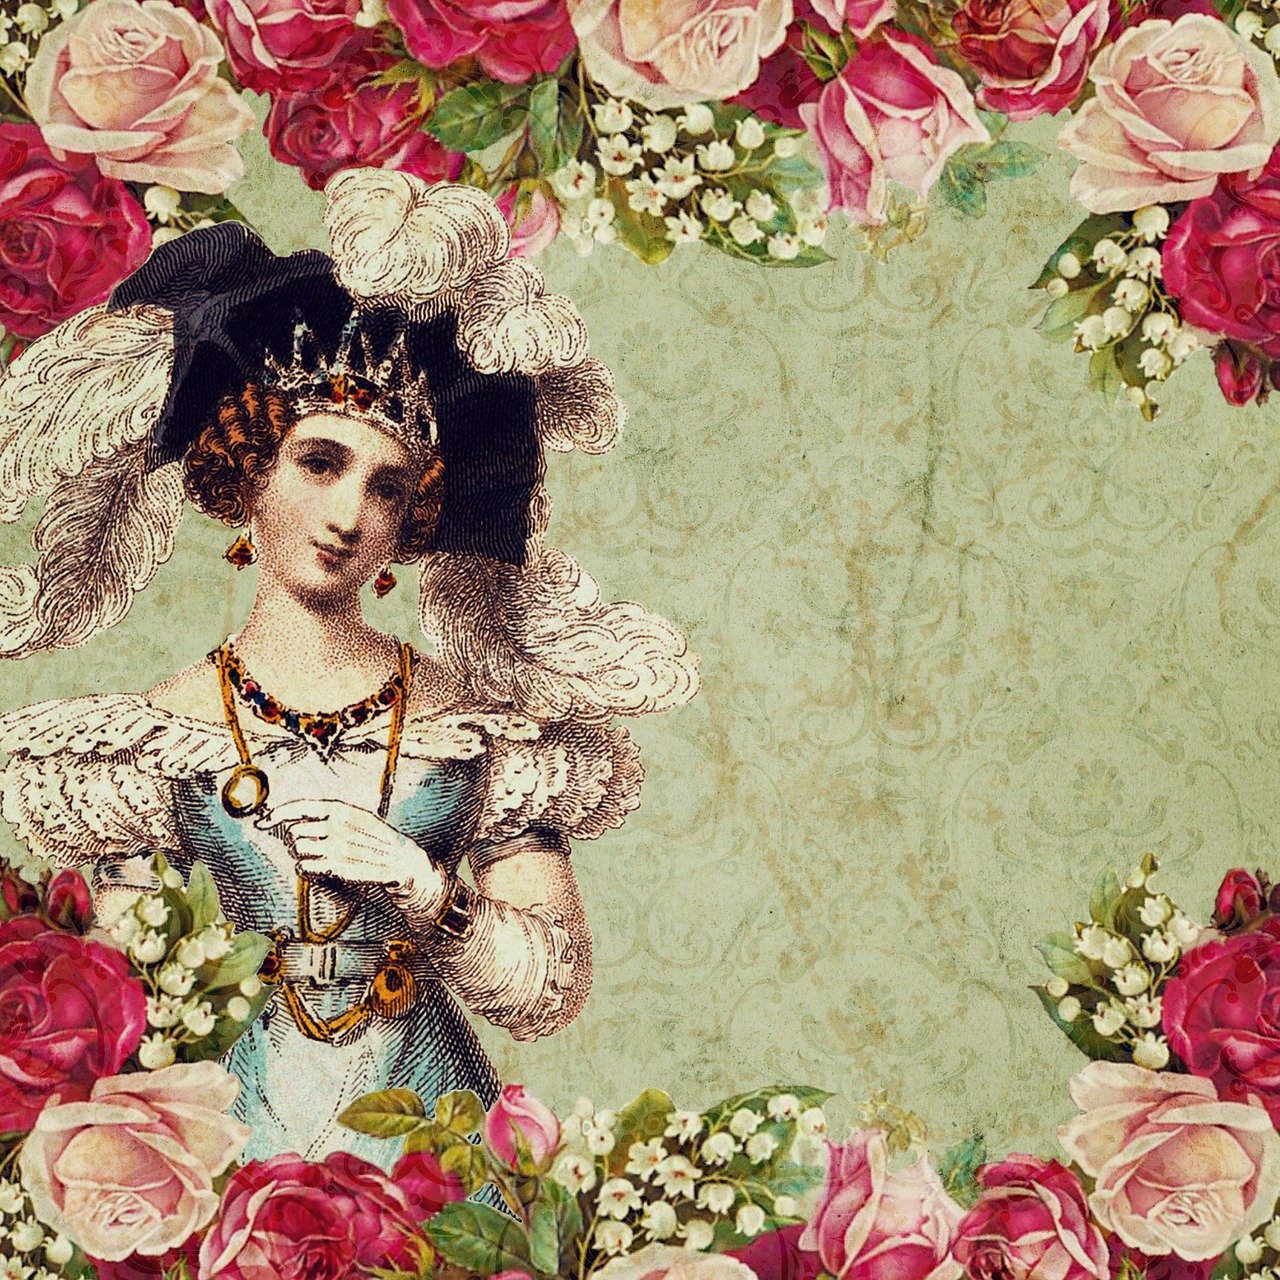 a picture of a woman surrounded by roses, a digital rendering, rococo, carnival background, ornate borders, vintage clothing, ornate decorative background